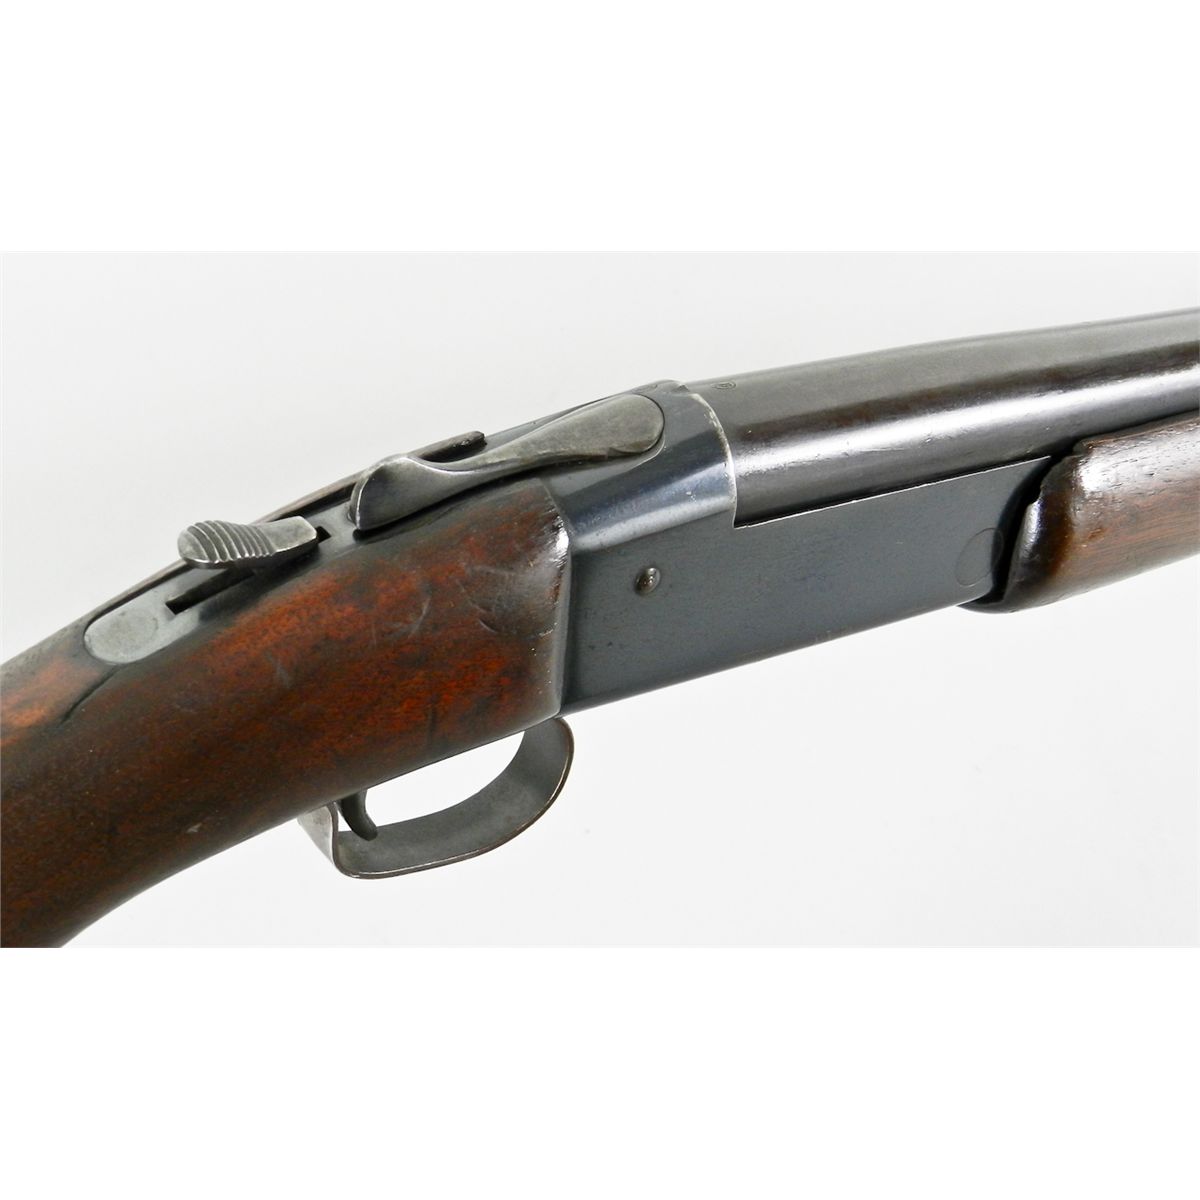 The Boy's model of Winchester's 37 appeared in 1958.